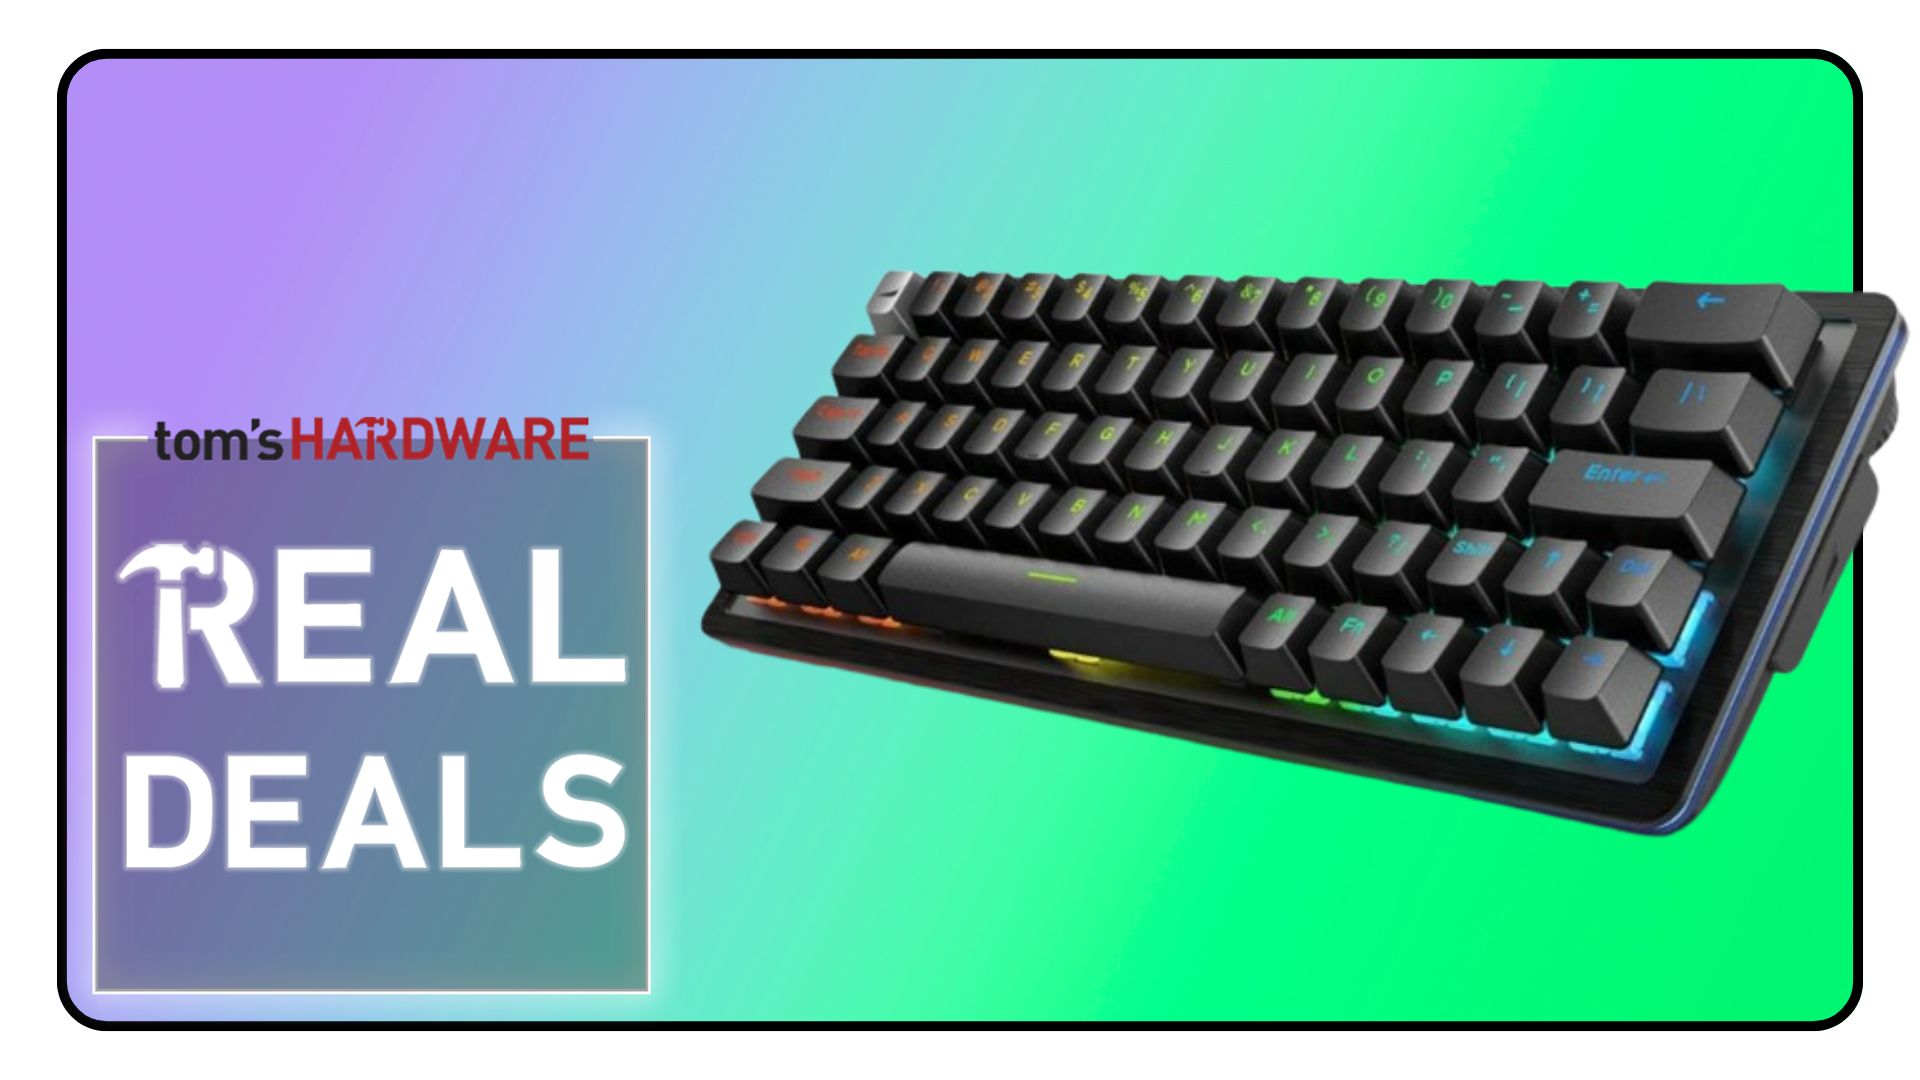 I use the Mountain Everest 60 keyboard as my daily driver and it's now on sale for a ridiculous $19